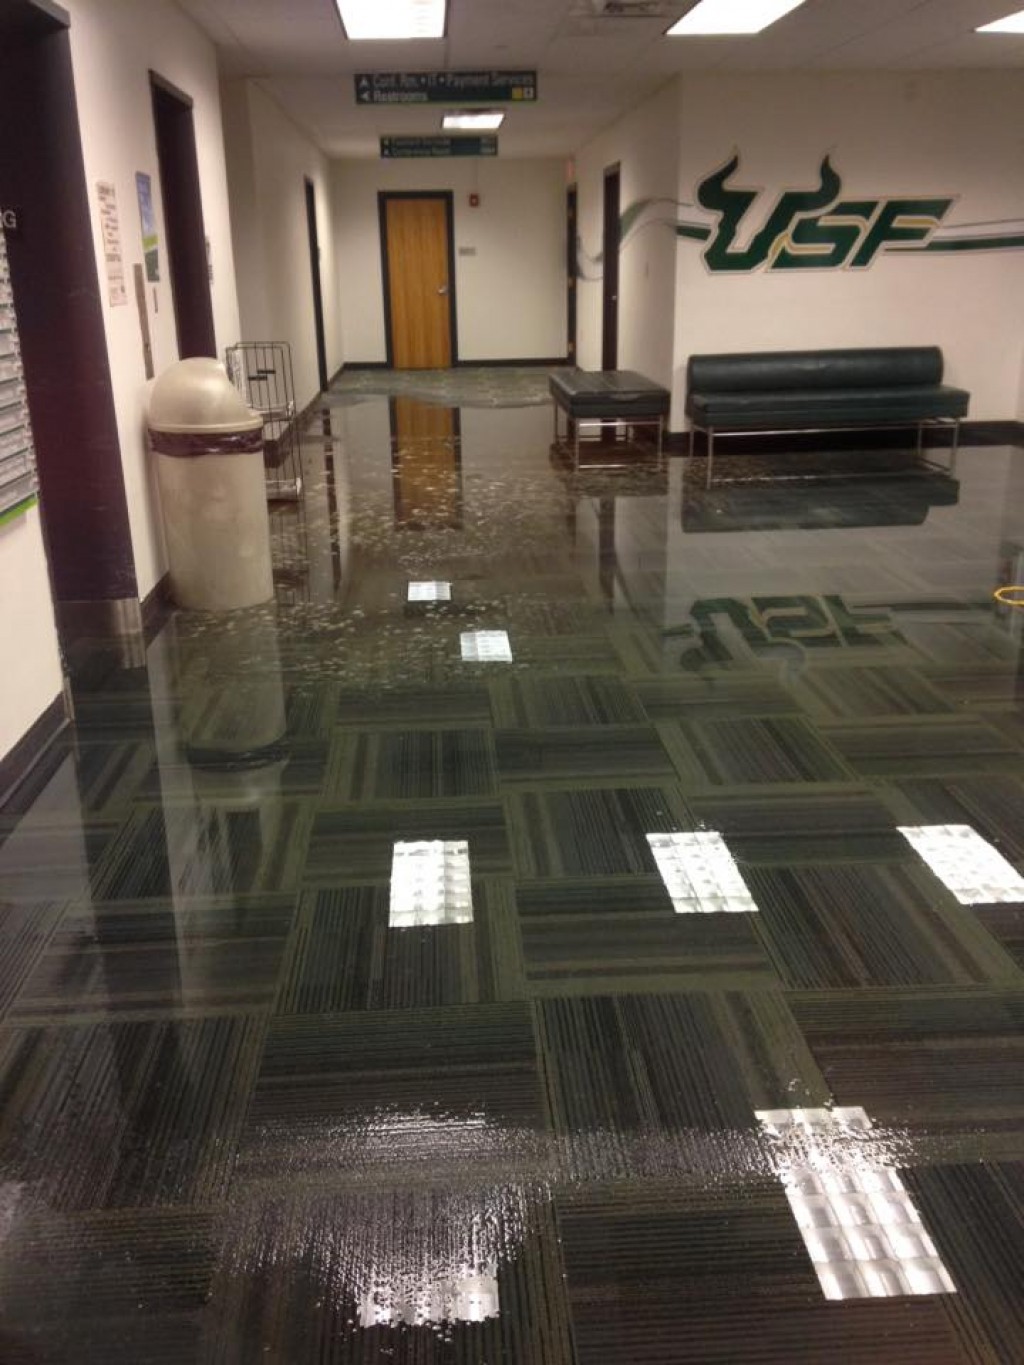 SVC basement reopens after flooding